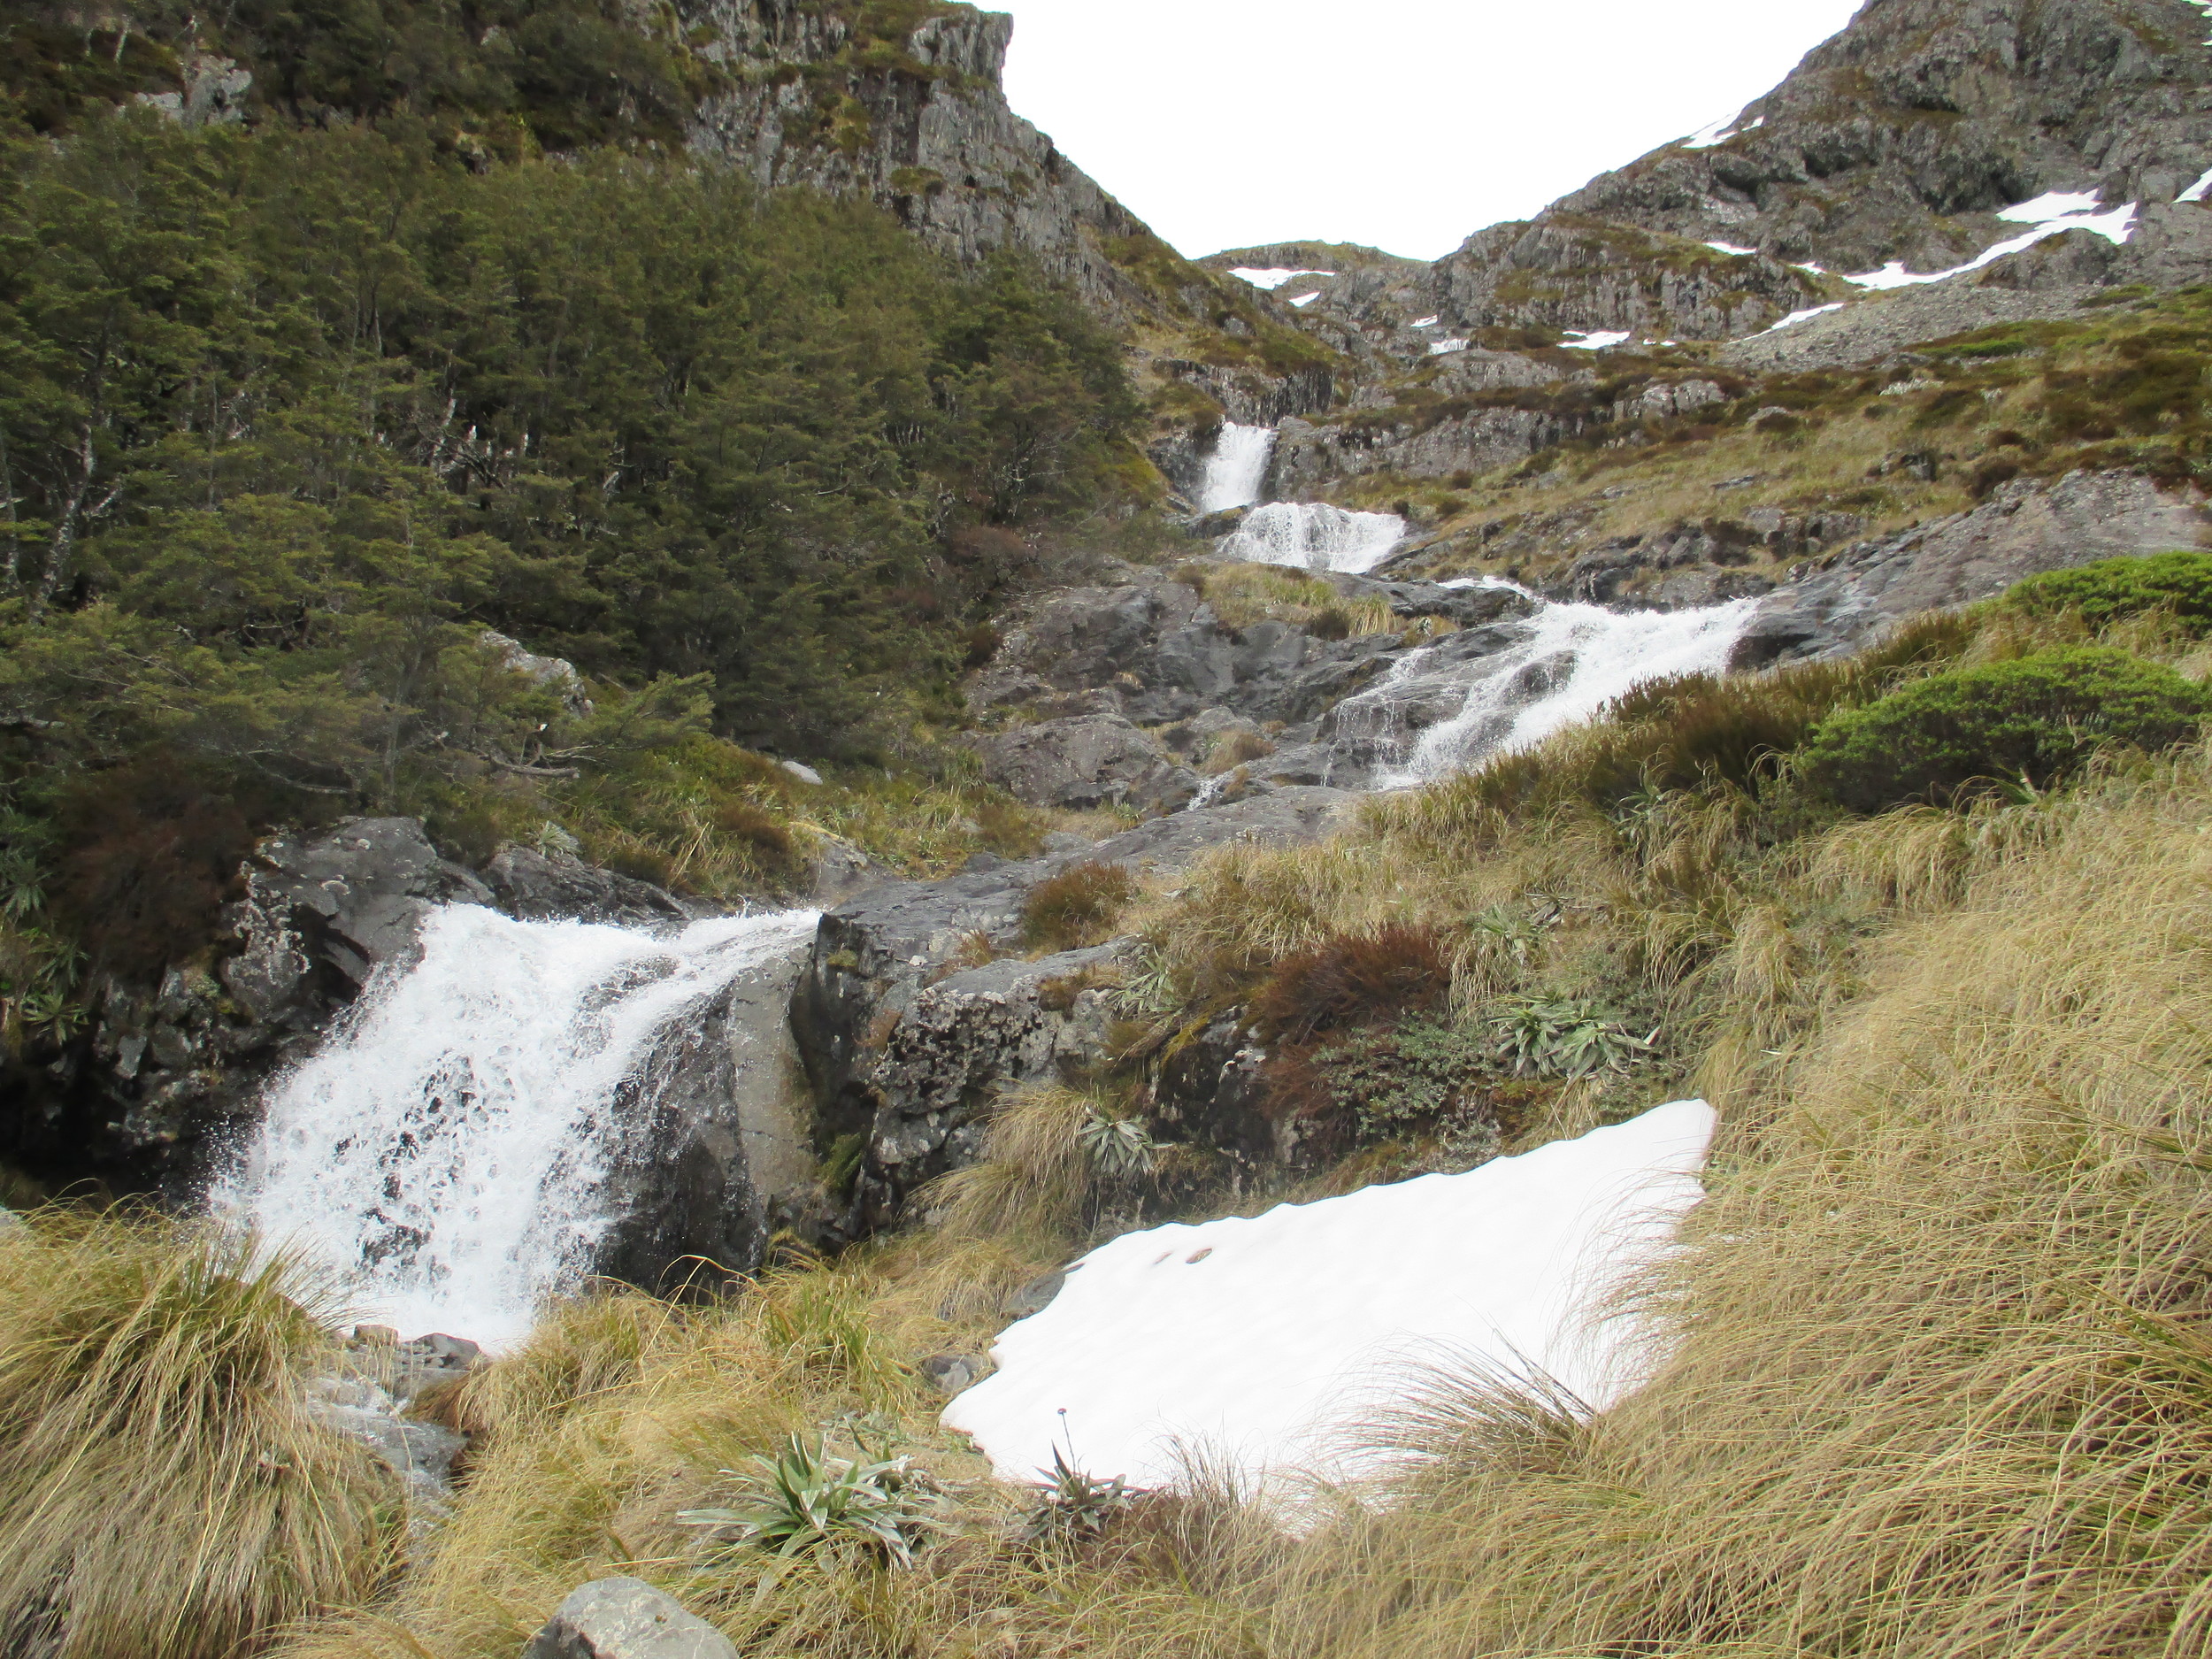   Waterfalls on way up Cascade track to Angelus  